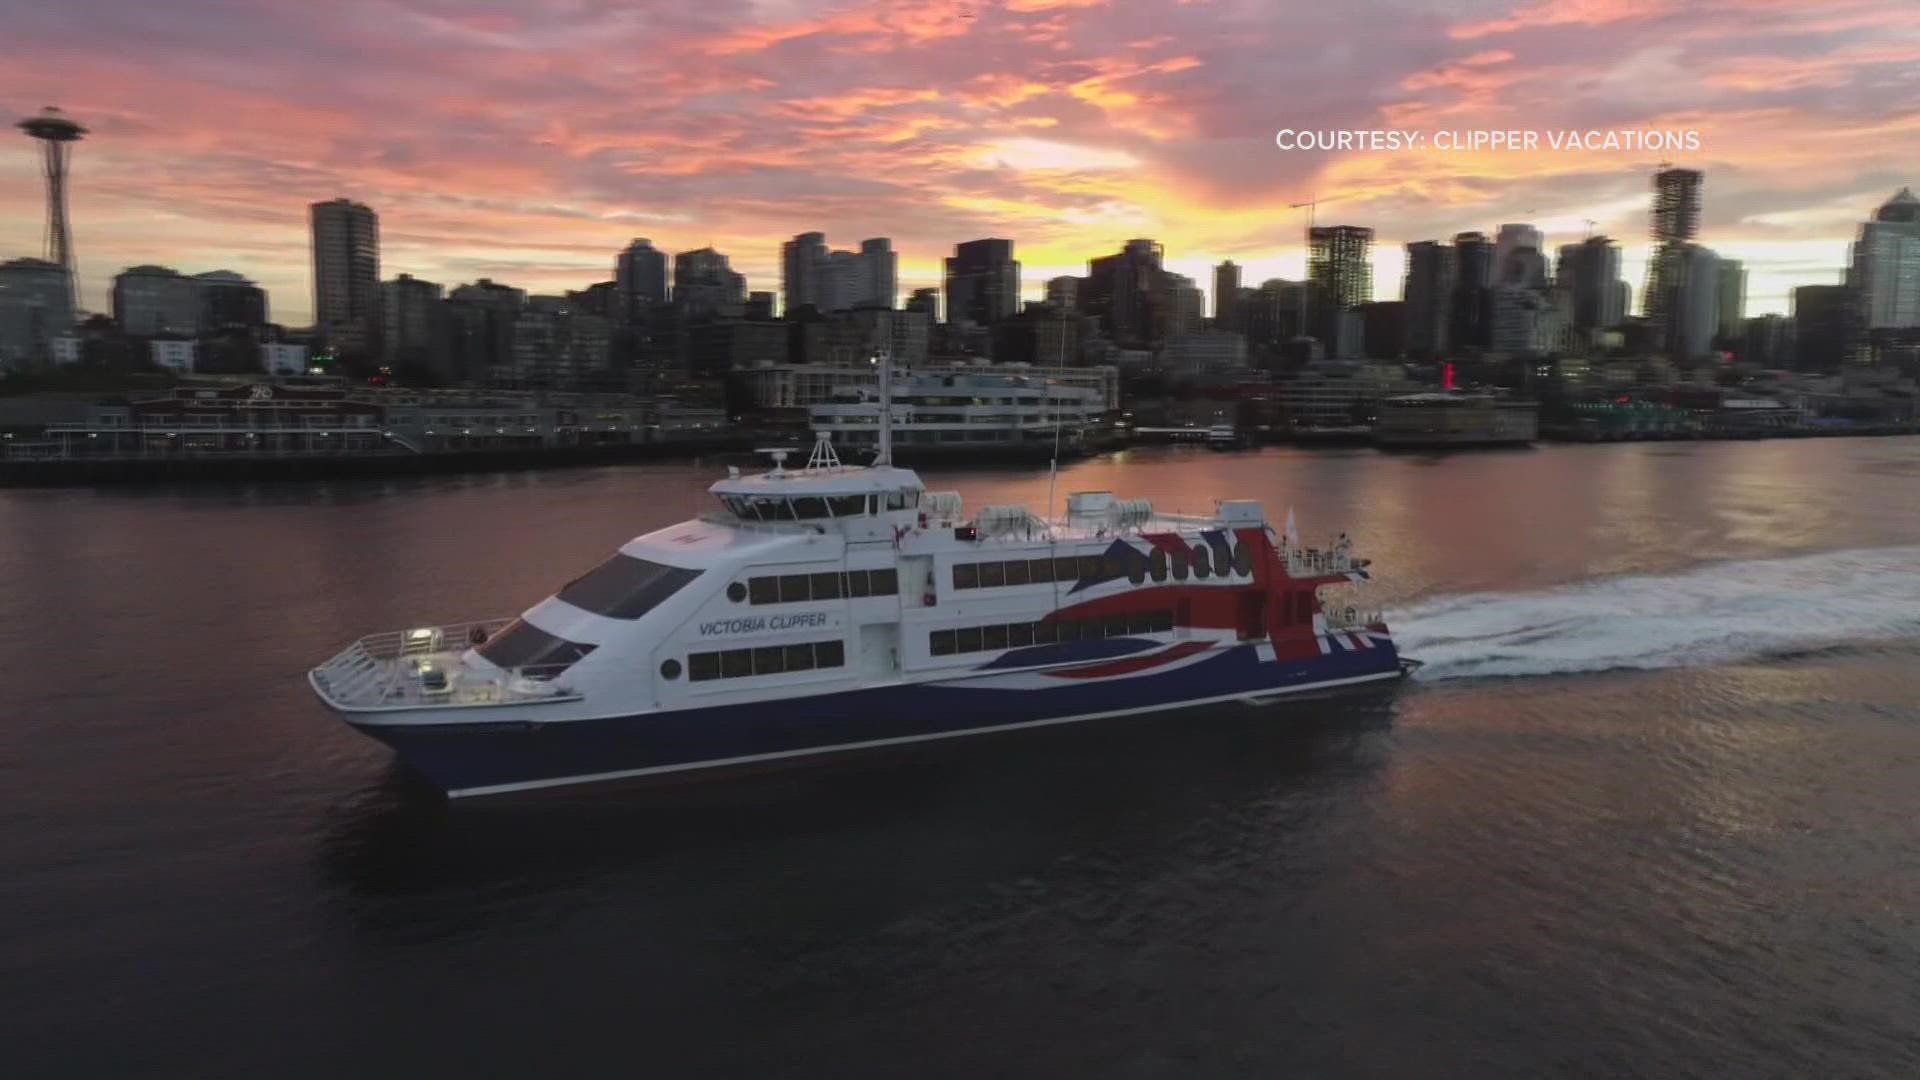 Companies like the Victoria Clipper are awaiting clarification due to conflicting crossing rules between the U.S. and Canada.